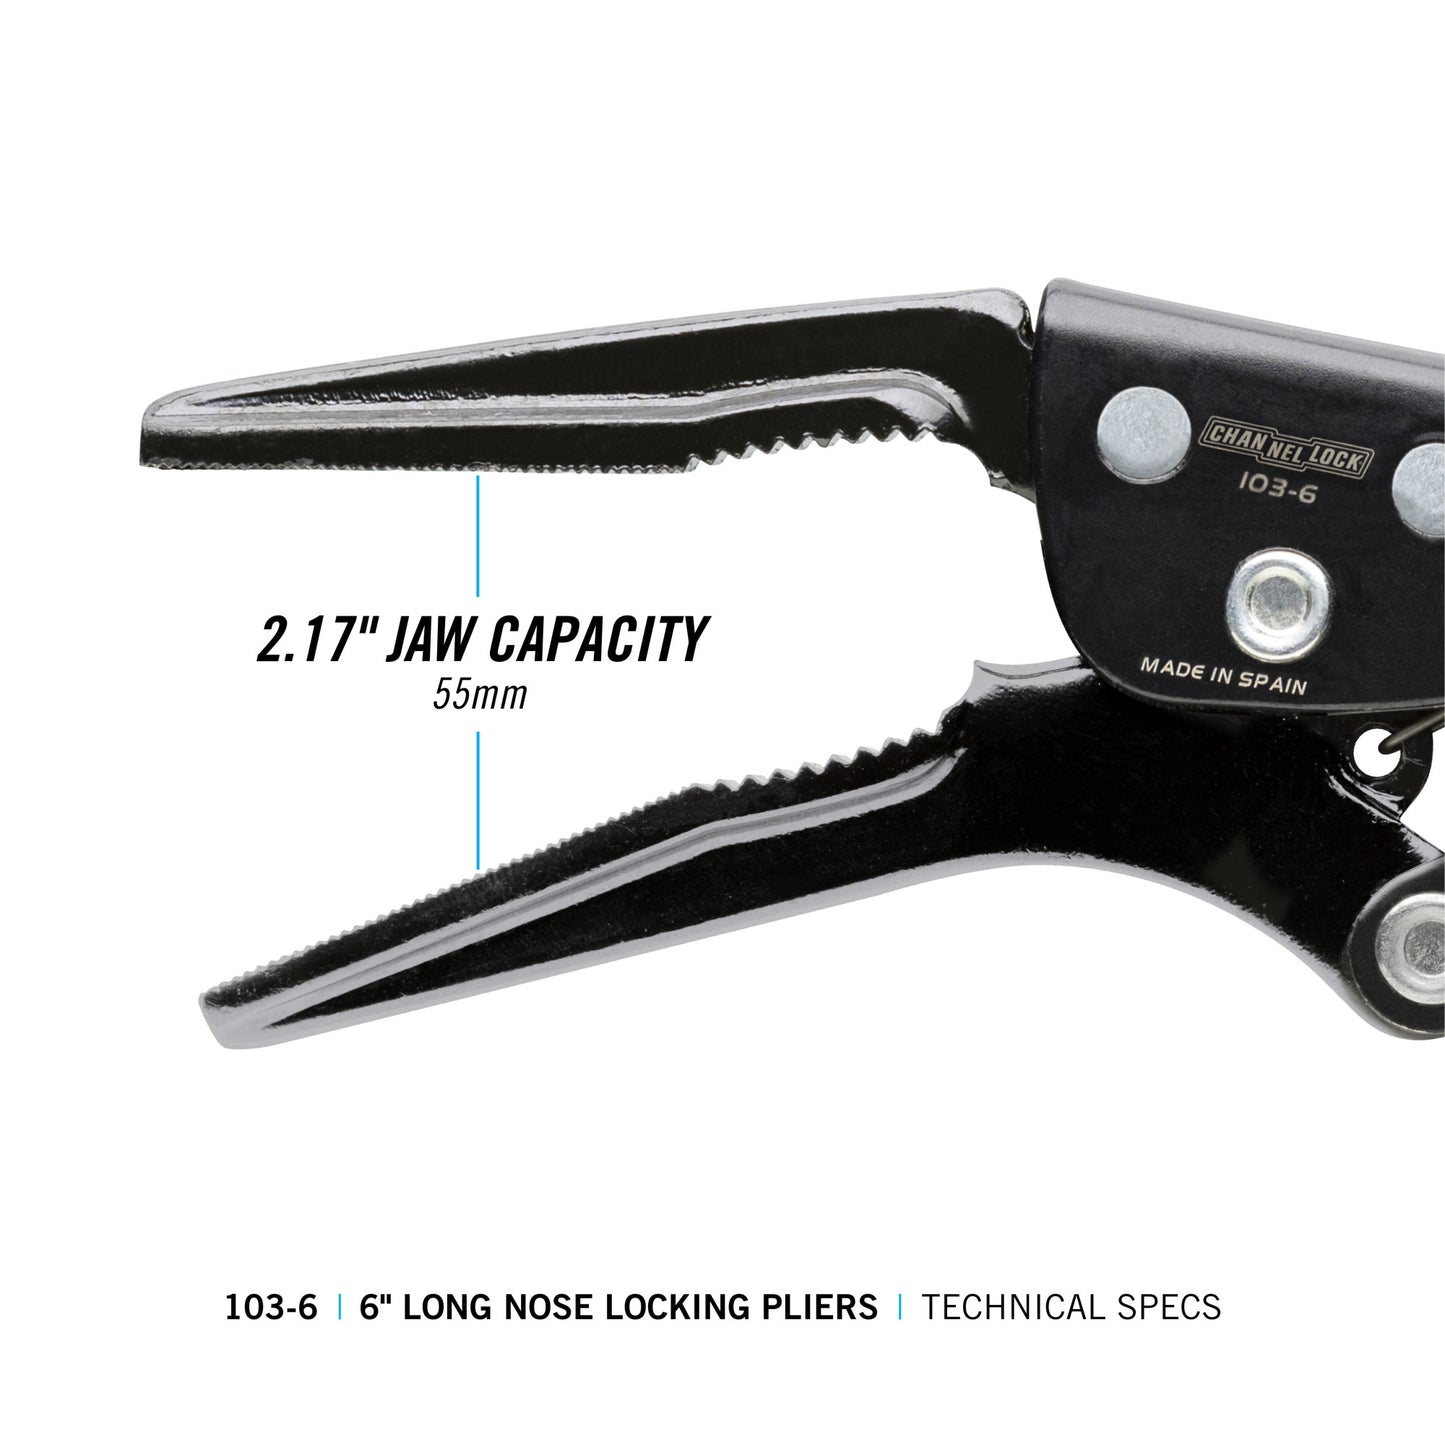 6-inch Combination Long Nose Locking Pliers (103-6)